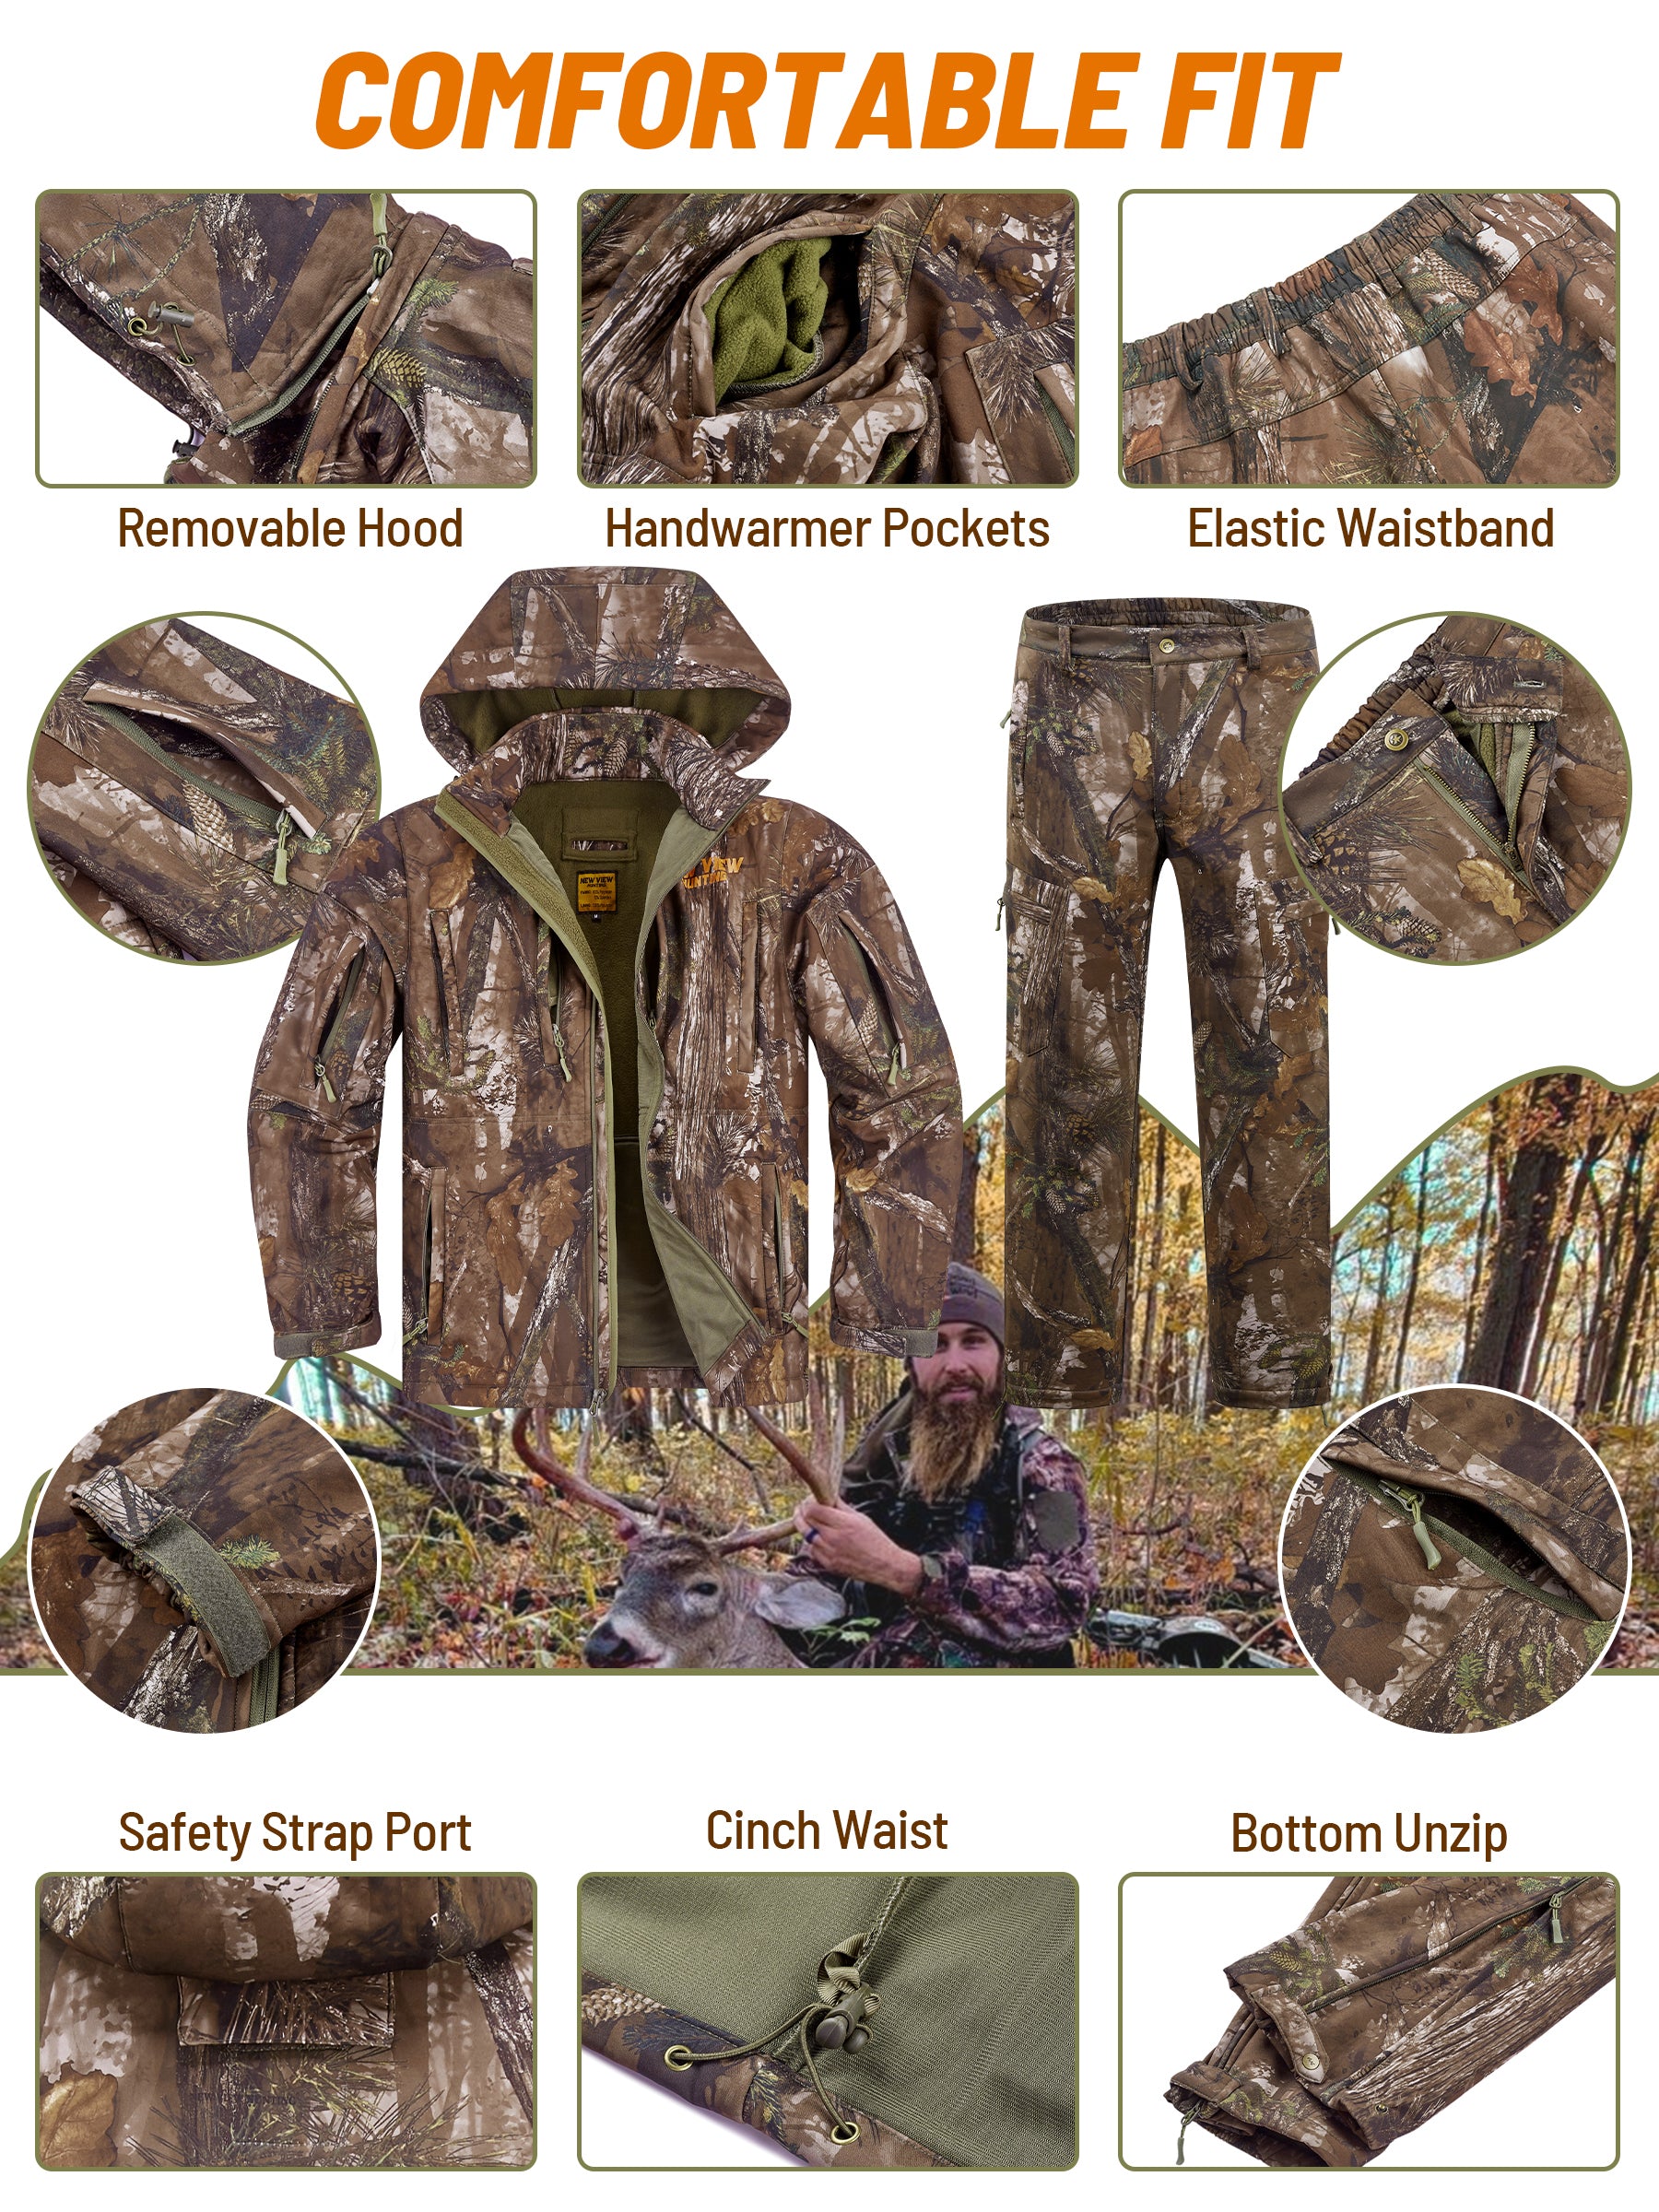 NEW VIEW Hunting Clothes for Men, Fishing Shirt, Lightweight Long Sleeve  Shirts for Turkey Hunting, Fishing, Hiking, Outdoors